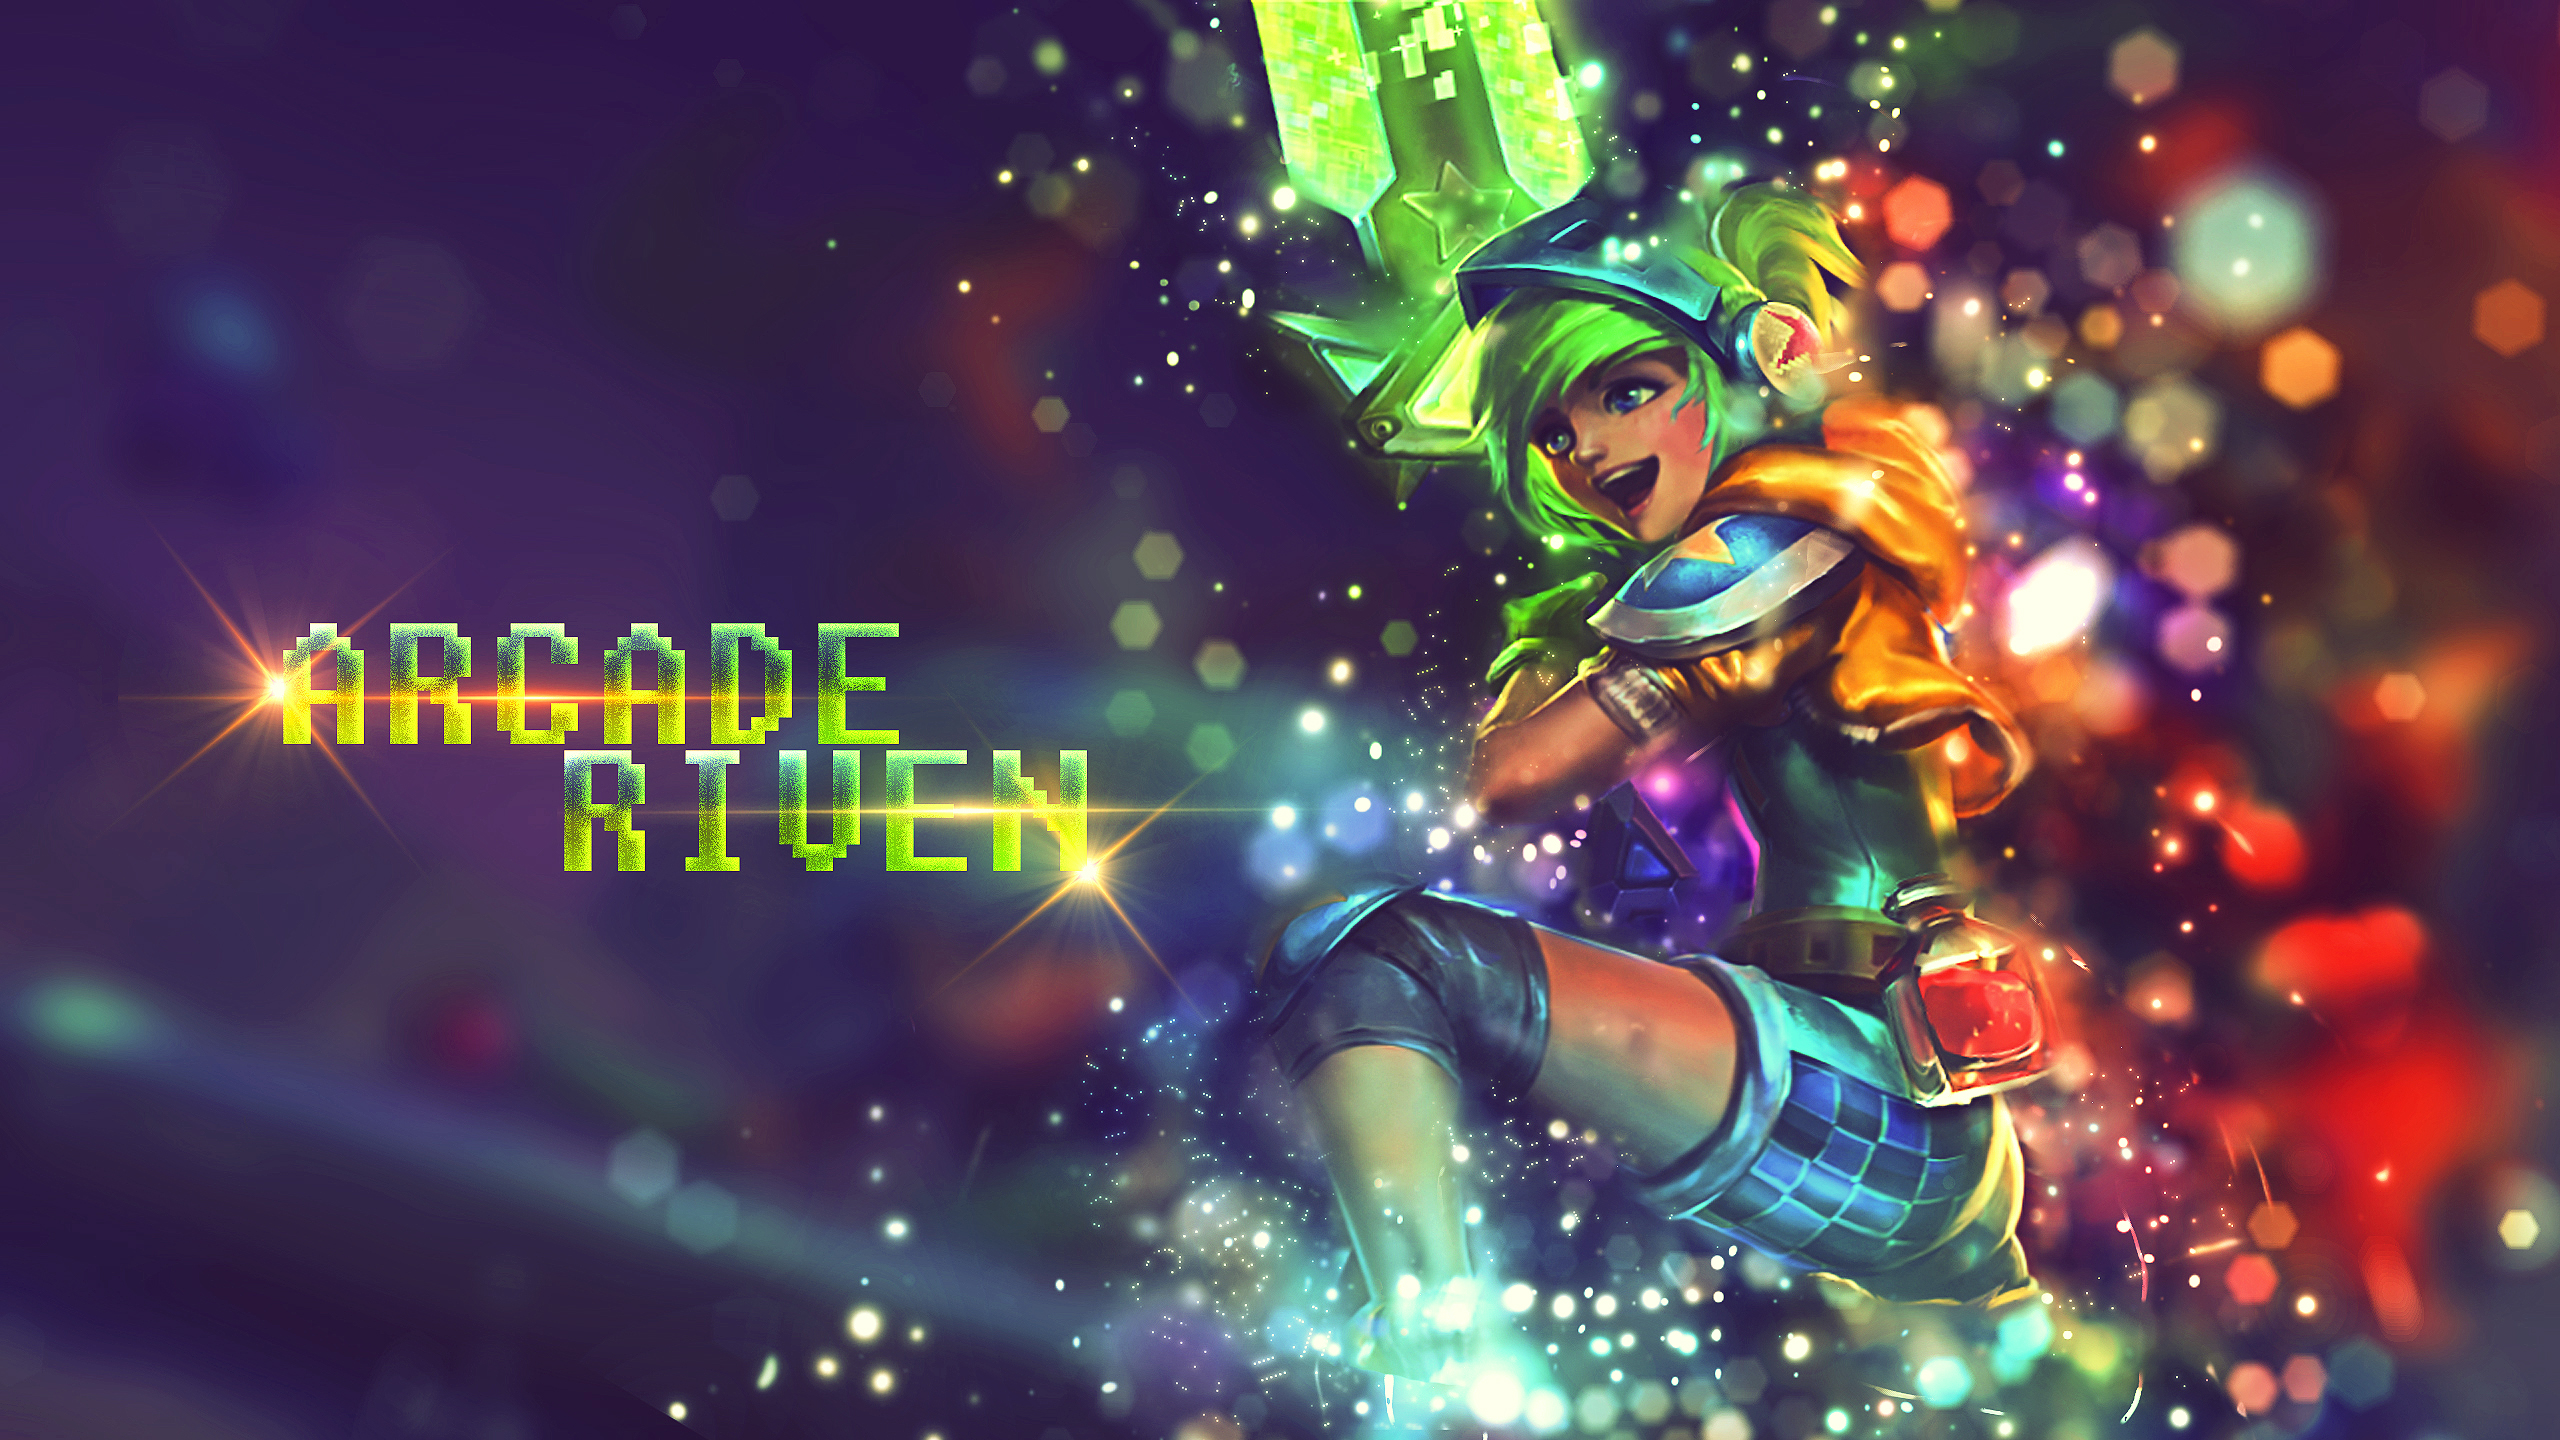 180 Riven League Of Legends HD Wallpapers and Backgrounds